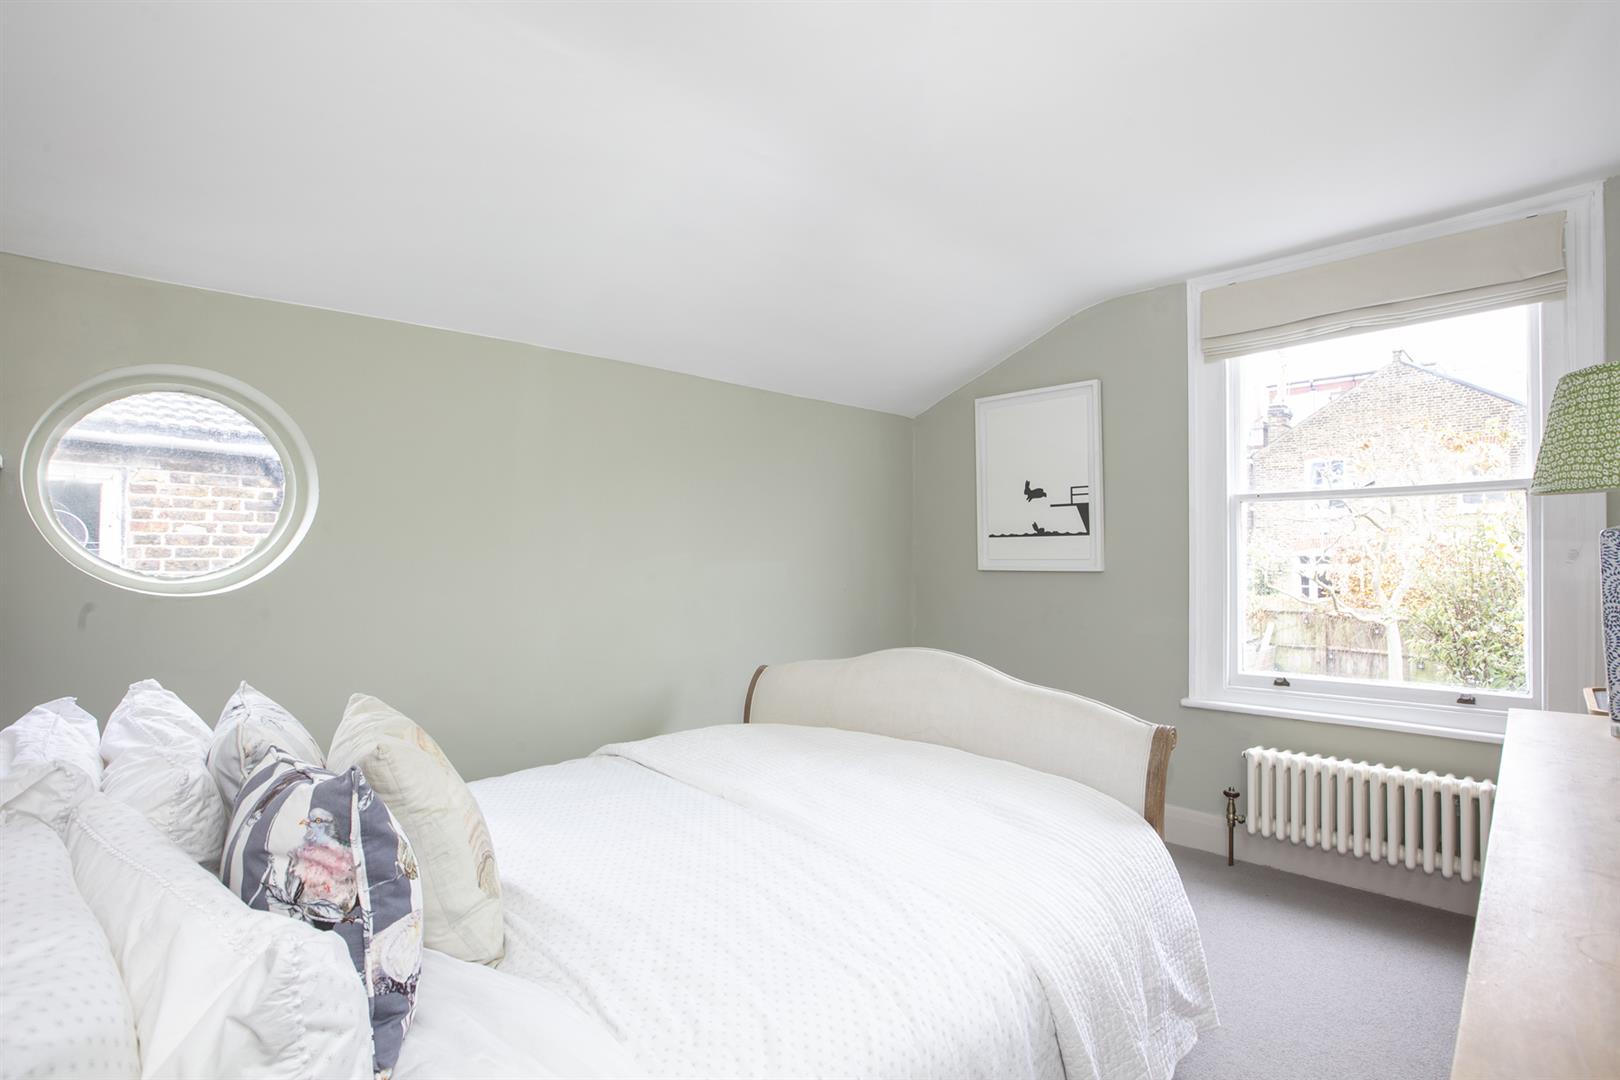 House - Semi-Detached For Sale in Bicknell Road, Herne Hill, SE5 887 view22